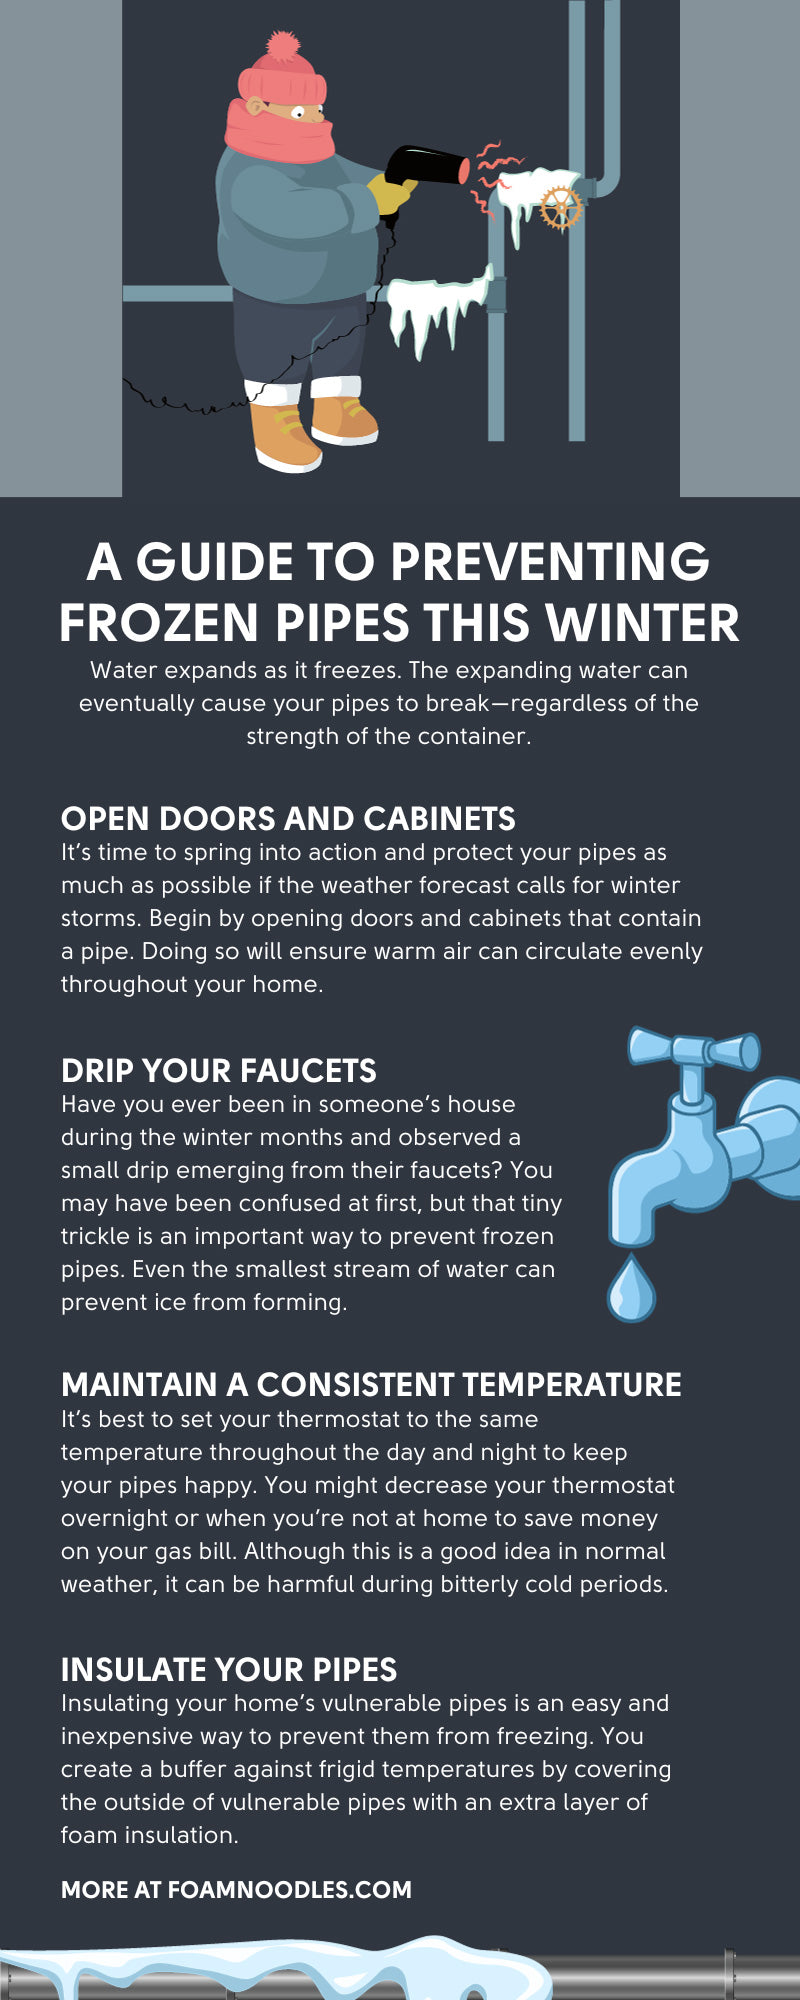 A Guide to Preventing Frozen Pipes This Winter